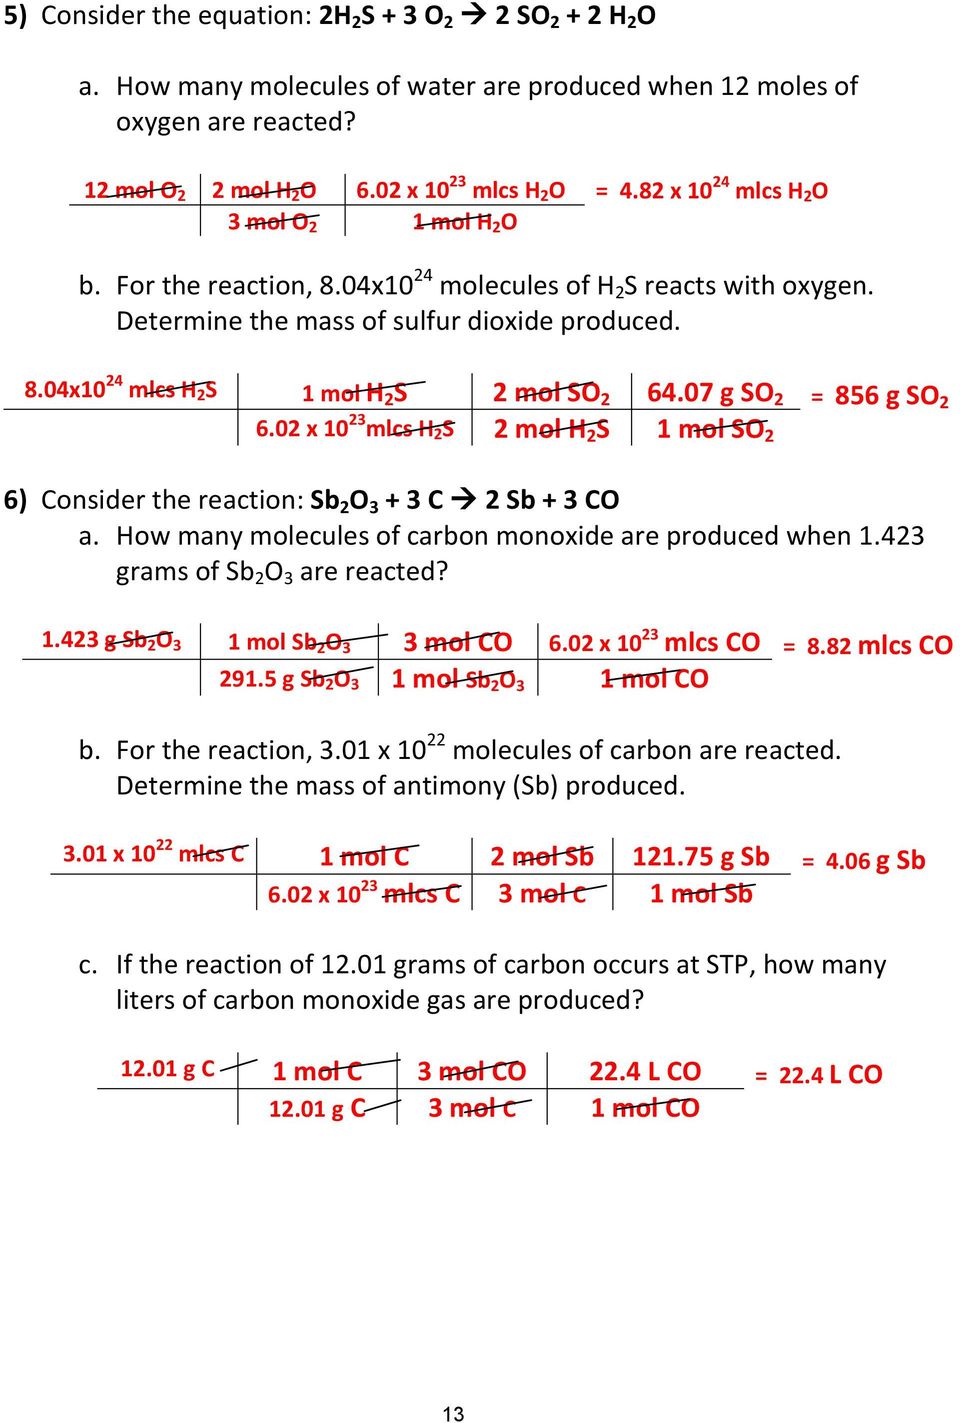 07 g SO 2 = 856 g SO 2 6.02 x 10 23 mlcs H 2 S 2 mol H 2 S 1 mol SO 2 6) Consider the reaction: Sb 2 O 3 + 3 C 2 Sb + 3 CO a. How many molecules of carbon monoxide are produced when 1.